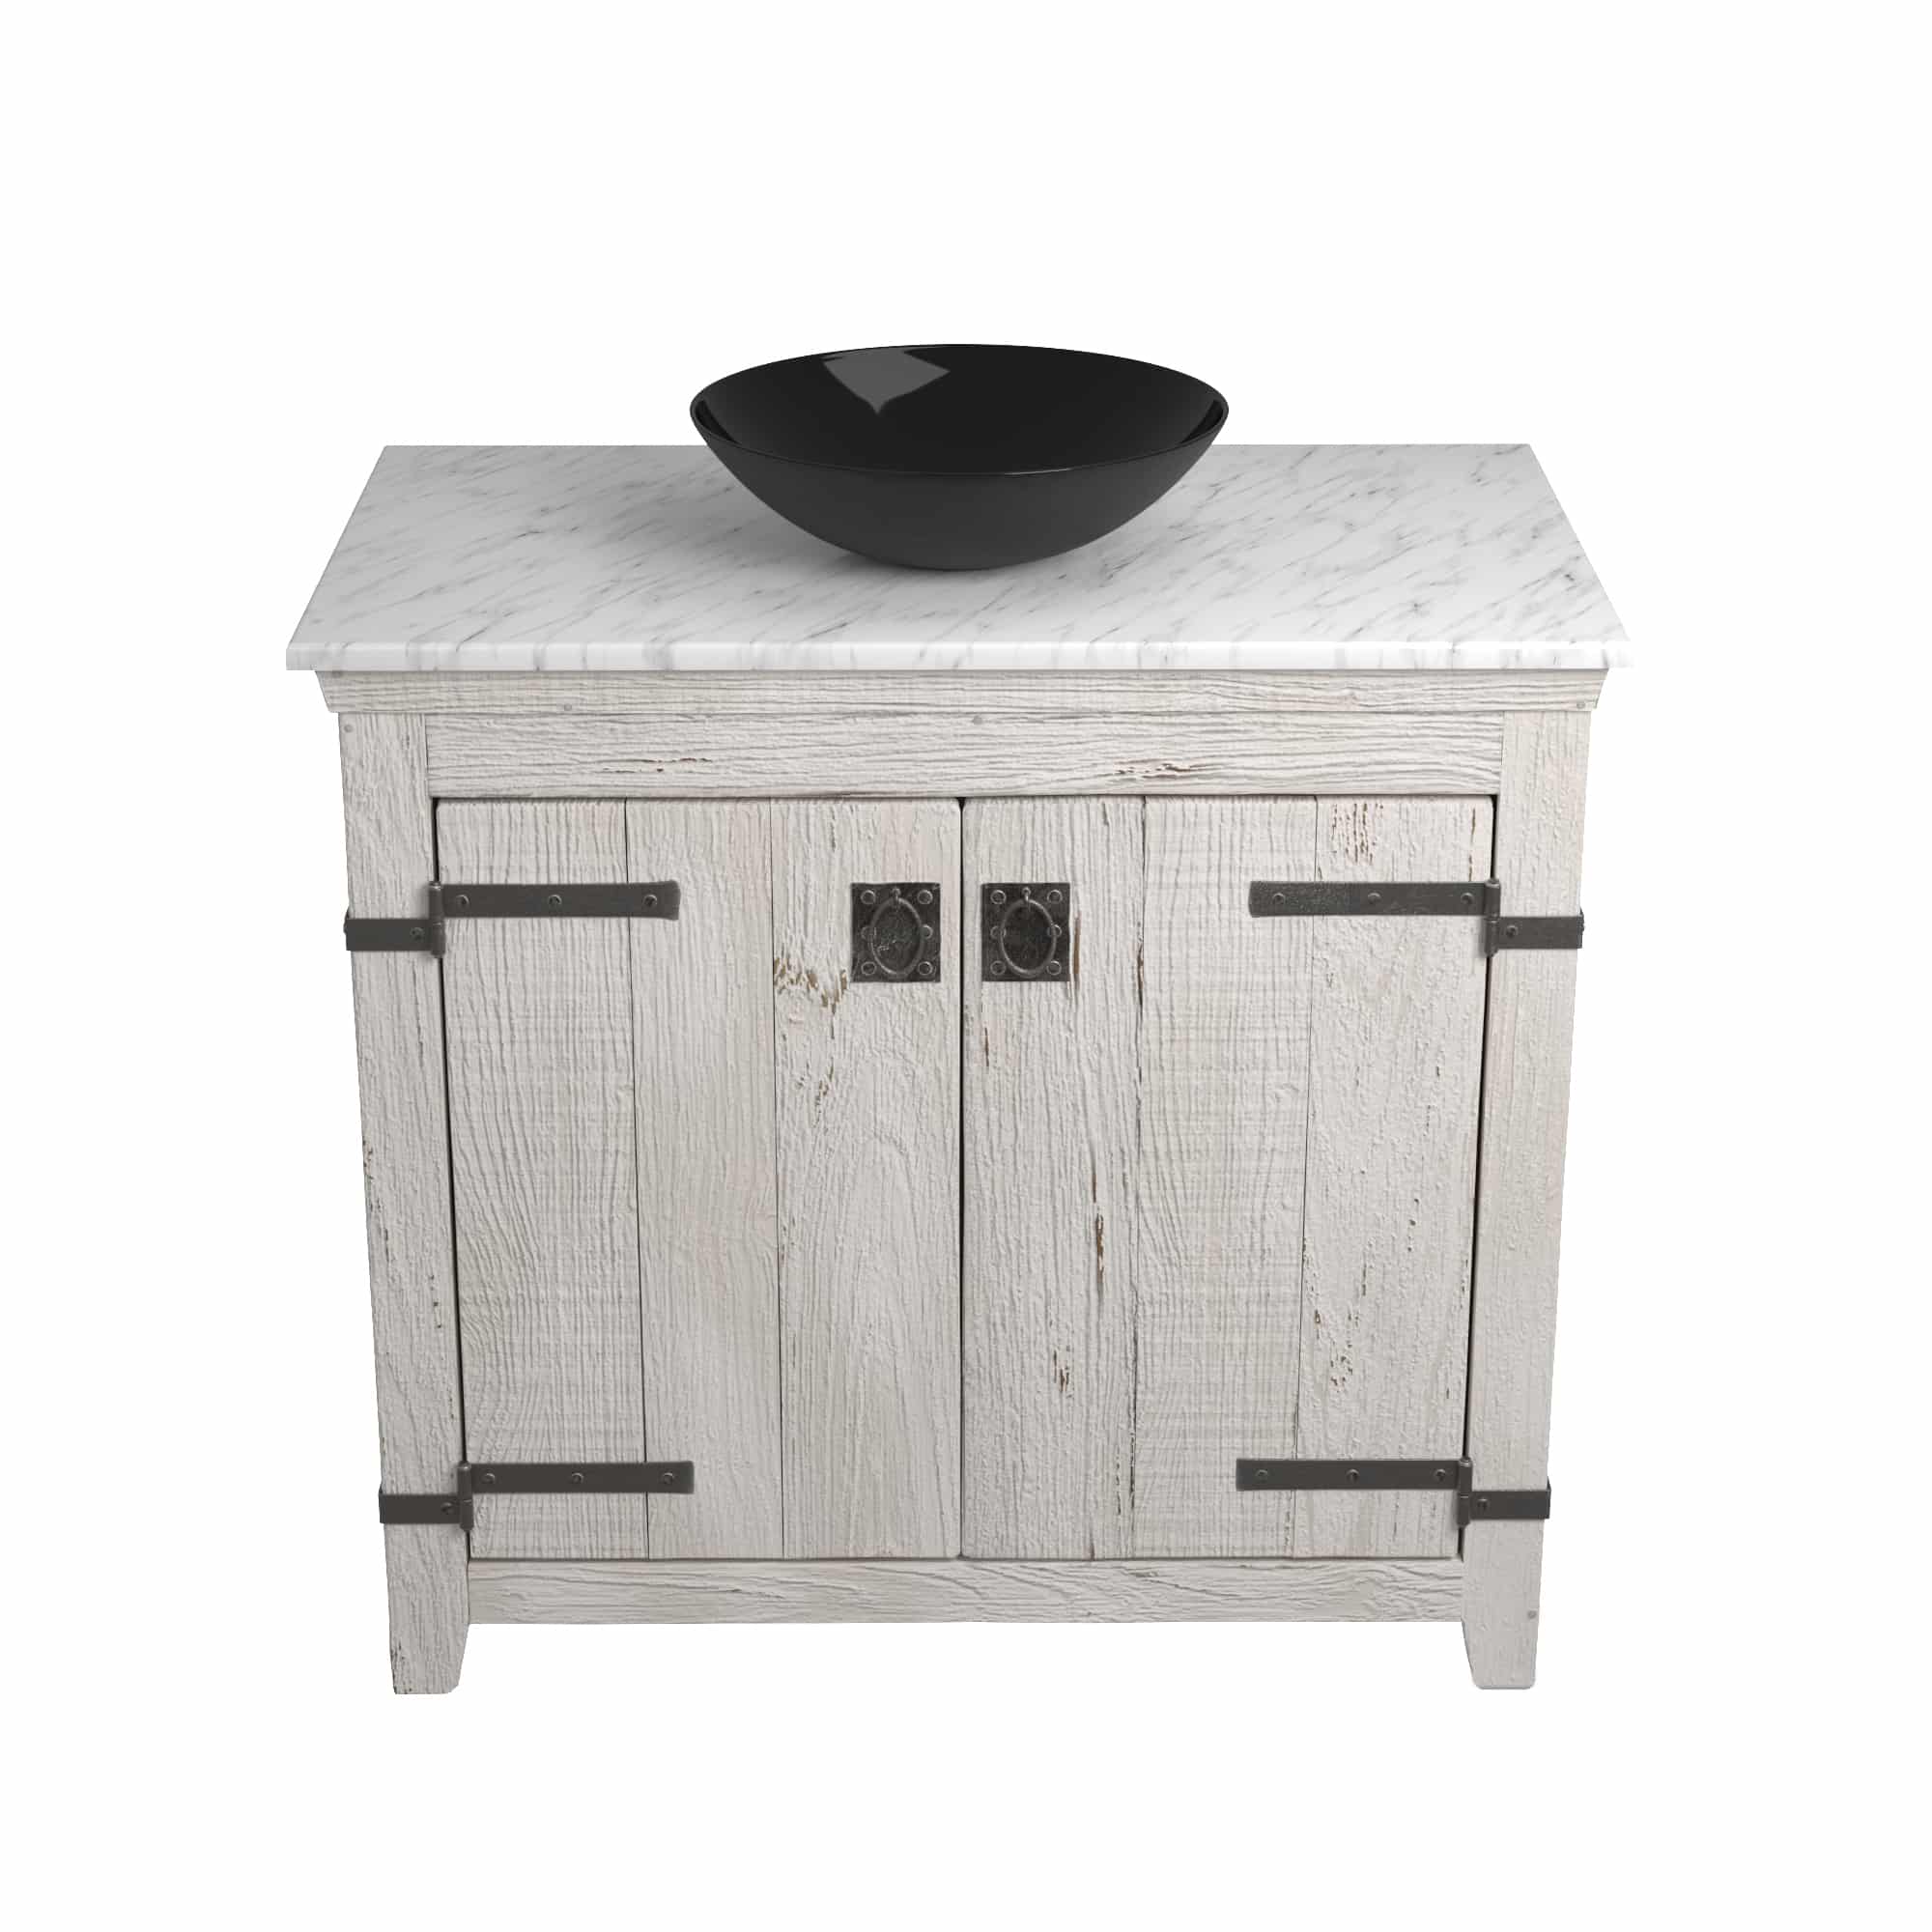 Native Trails 36" Americana Vanity in Whitewash with Carrara Marble Top and Verona in Abyss, No Faucet Hole, BND36-VB-CT-MG-066